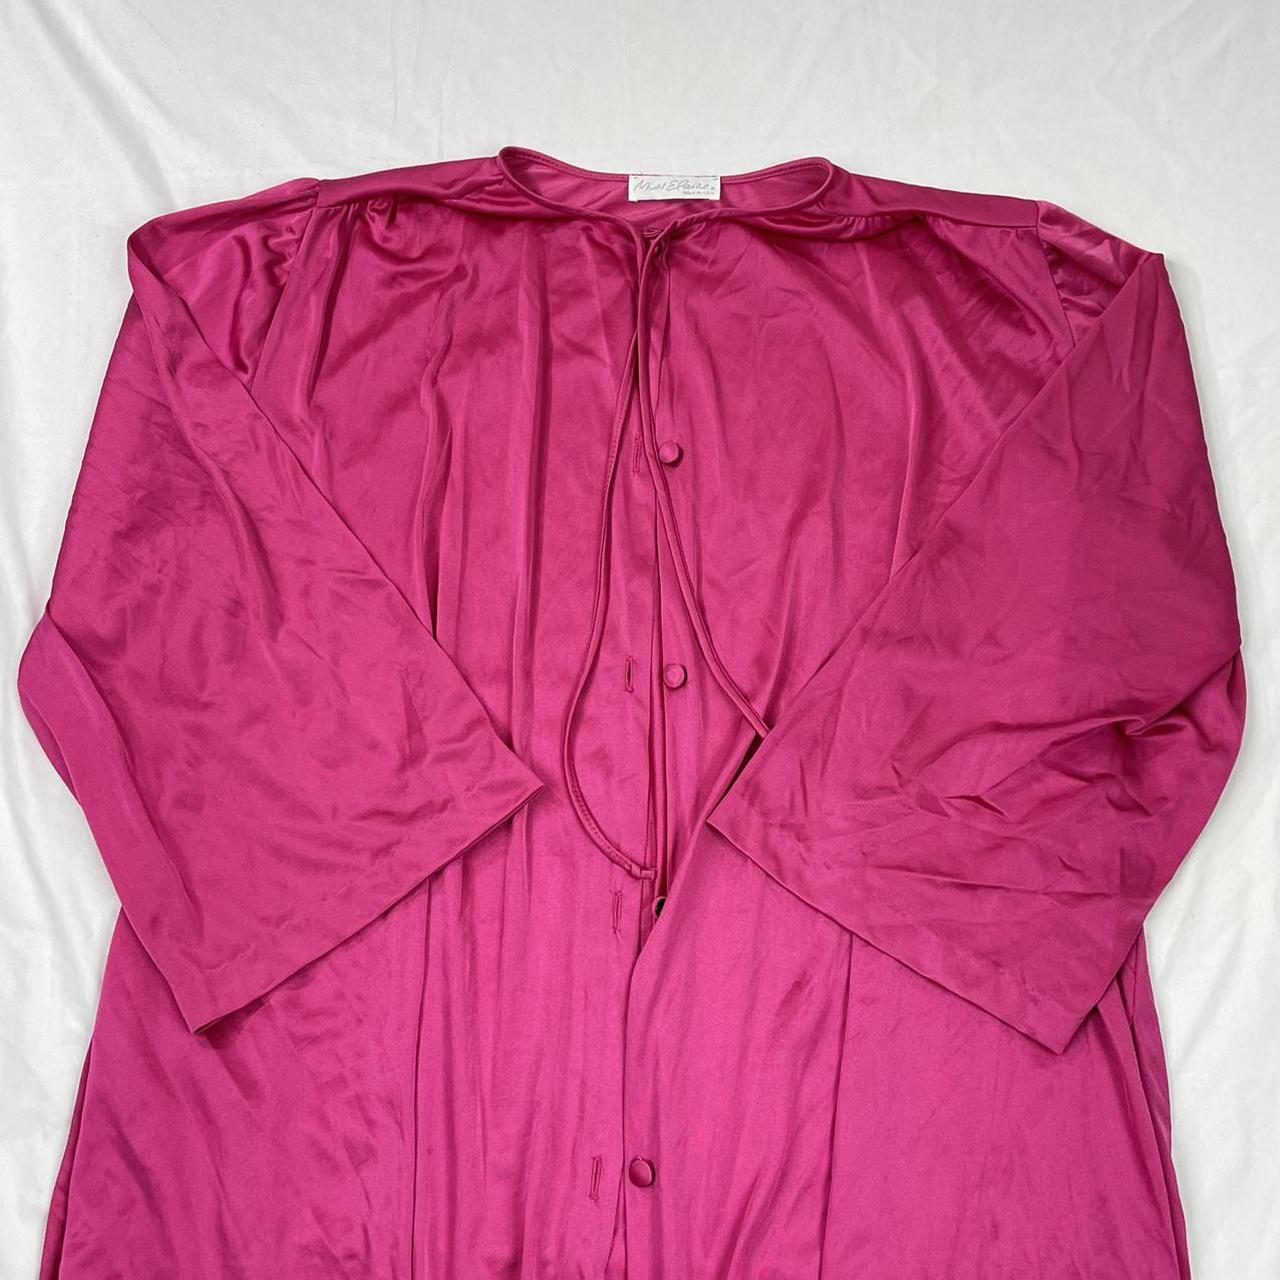 Product Image 4 - vintage silky robe

light and flowy,